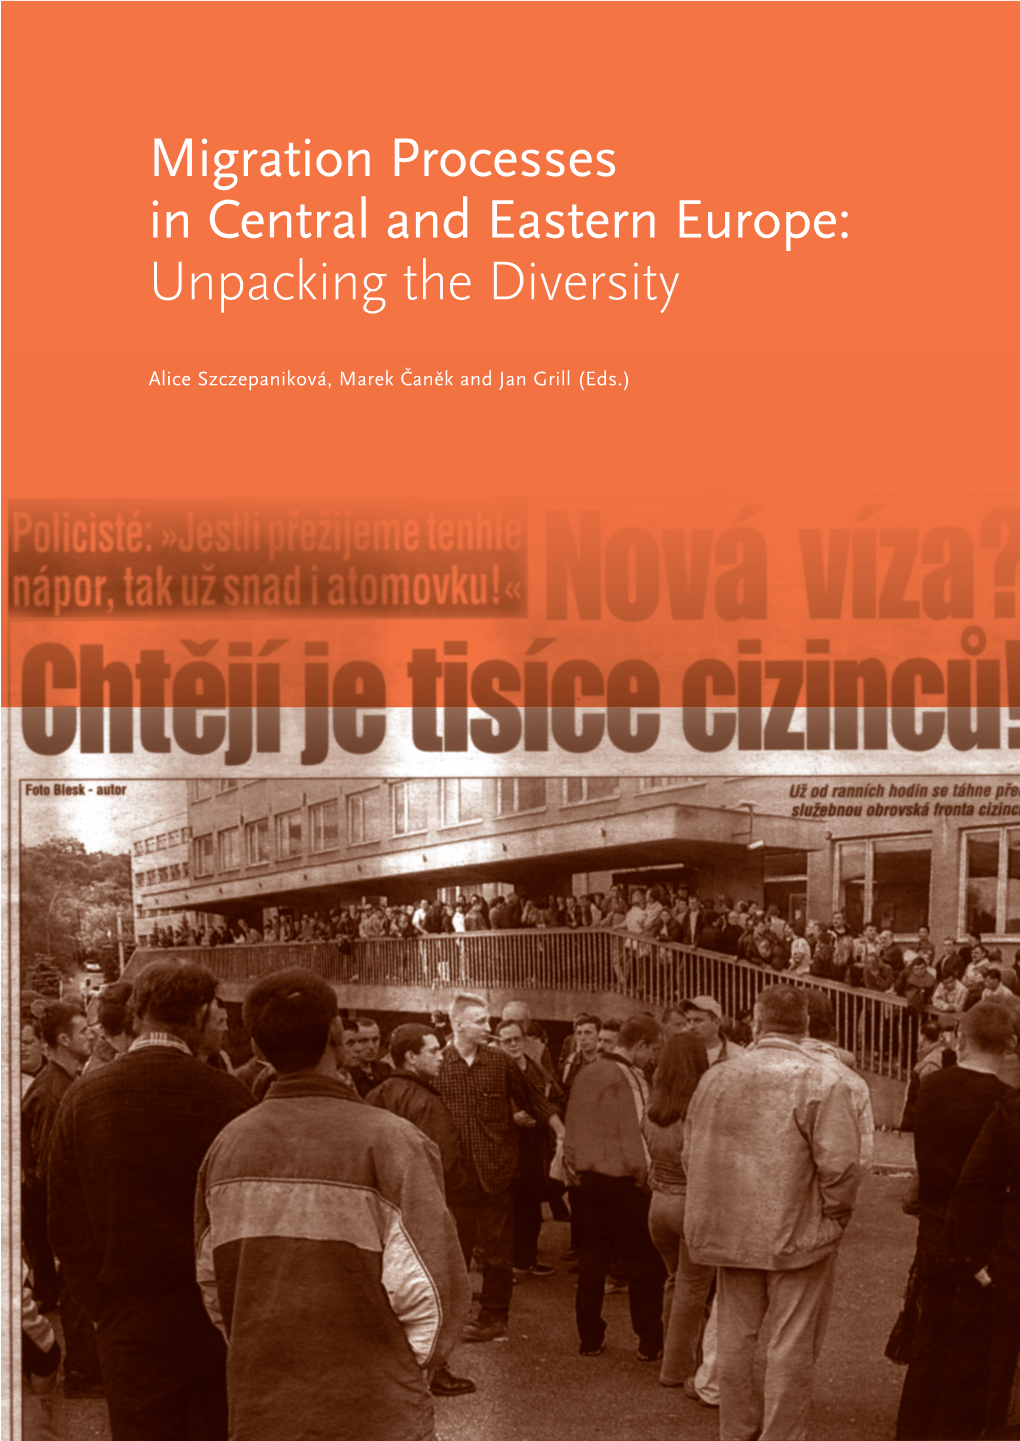 Migration Processes in Central and Eastern Europe: Unpacking the Diversity